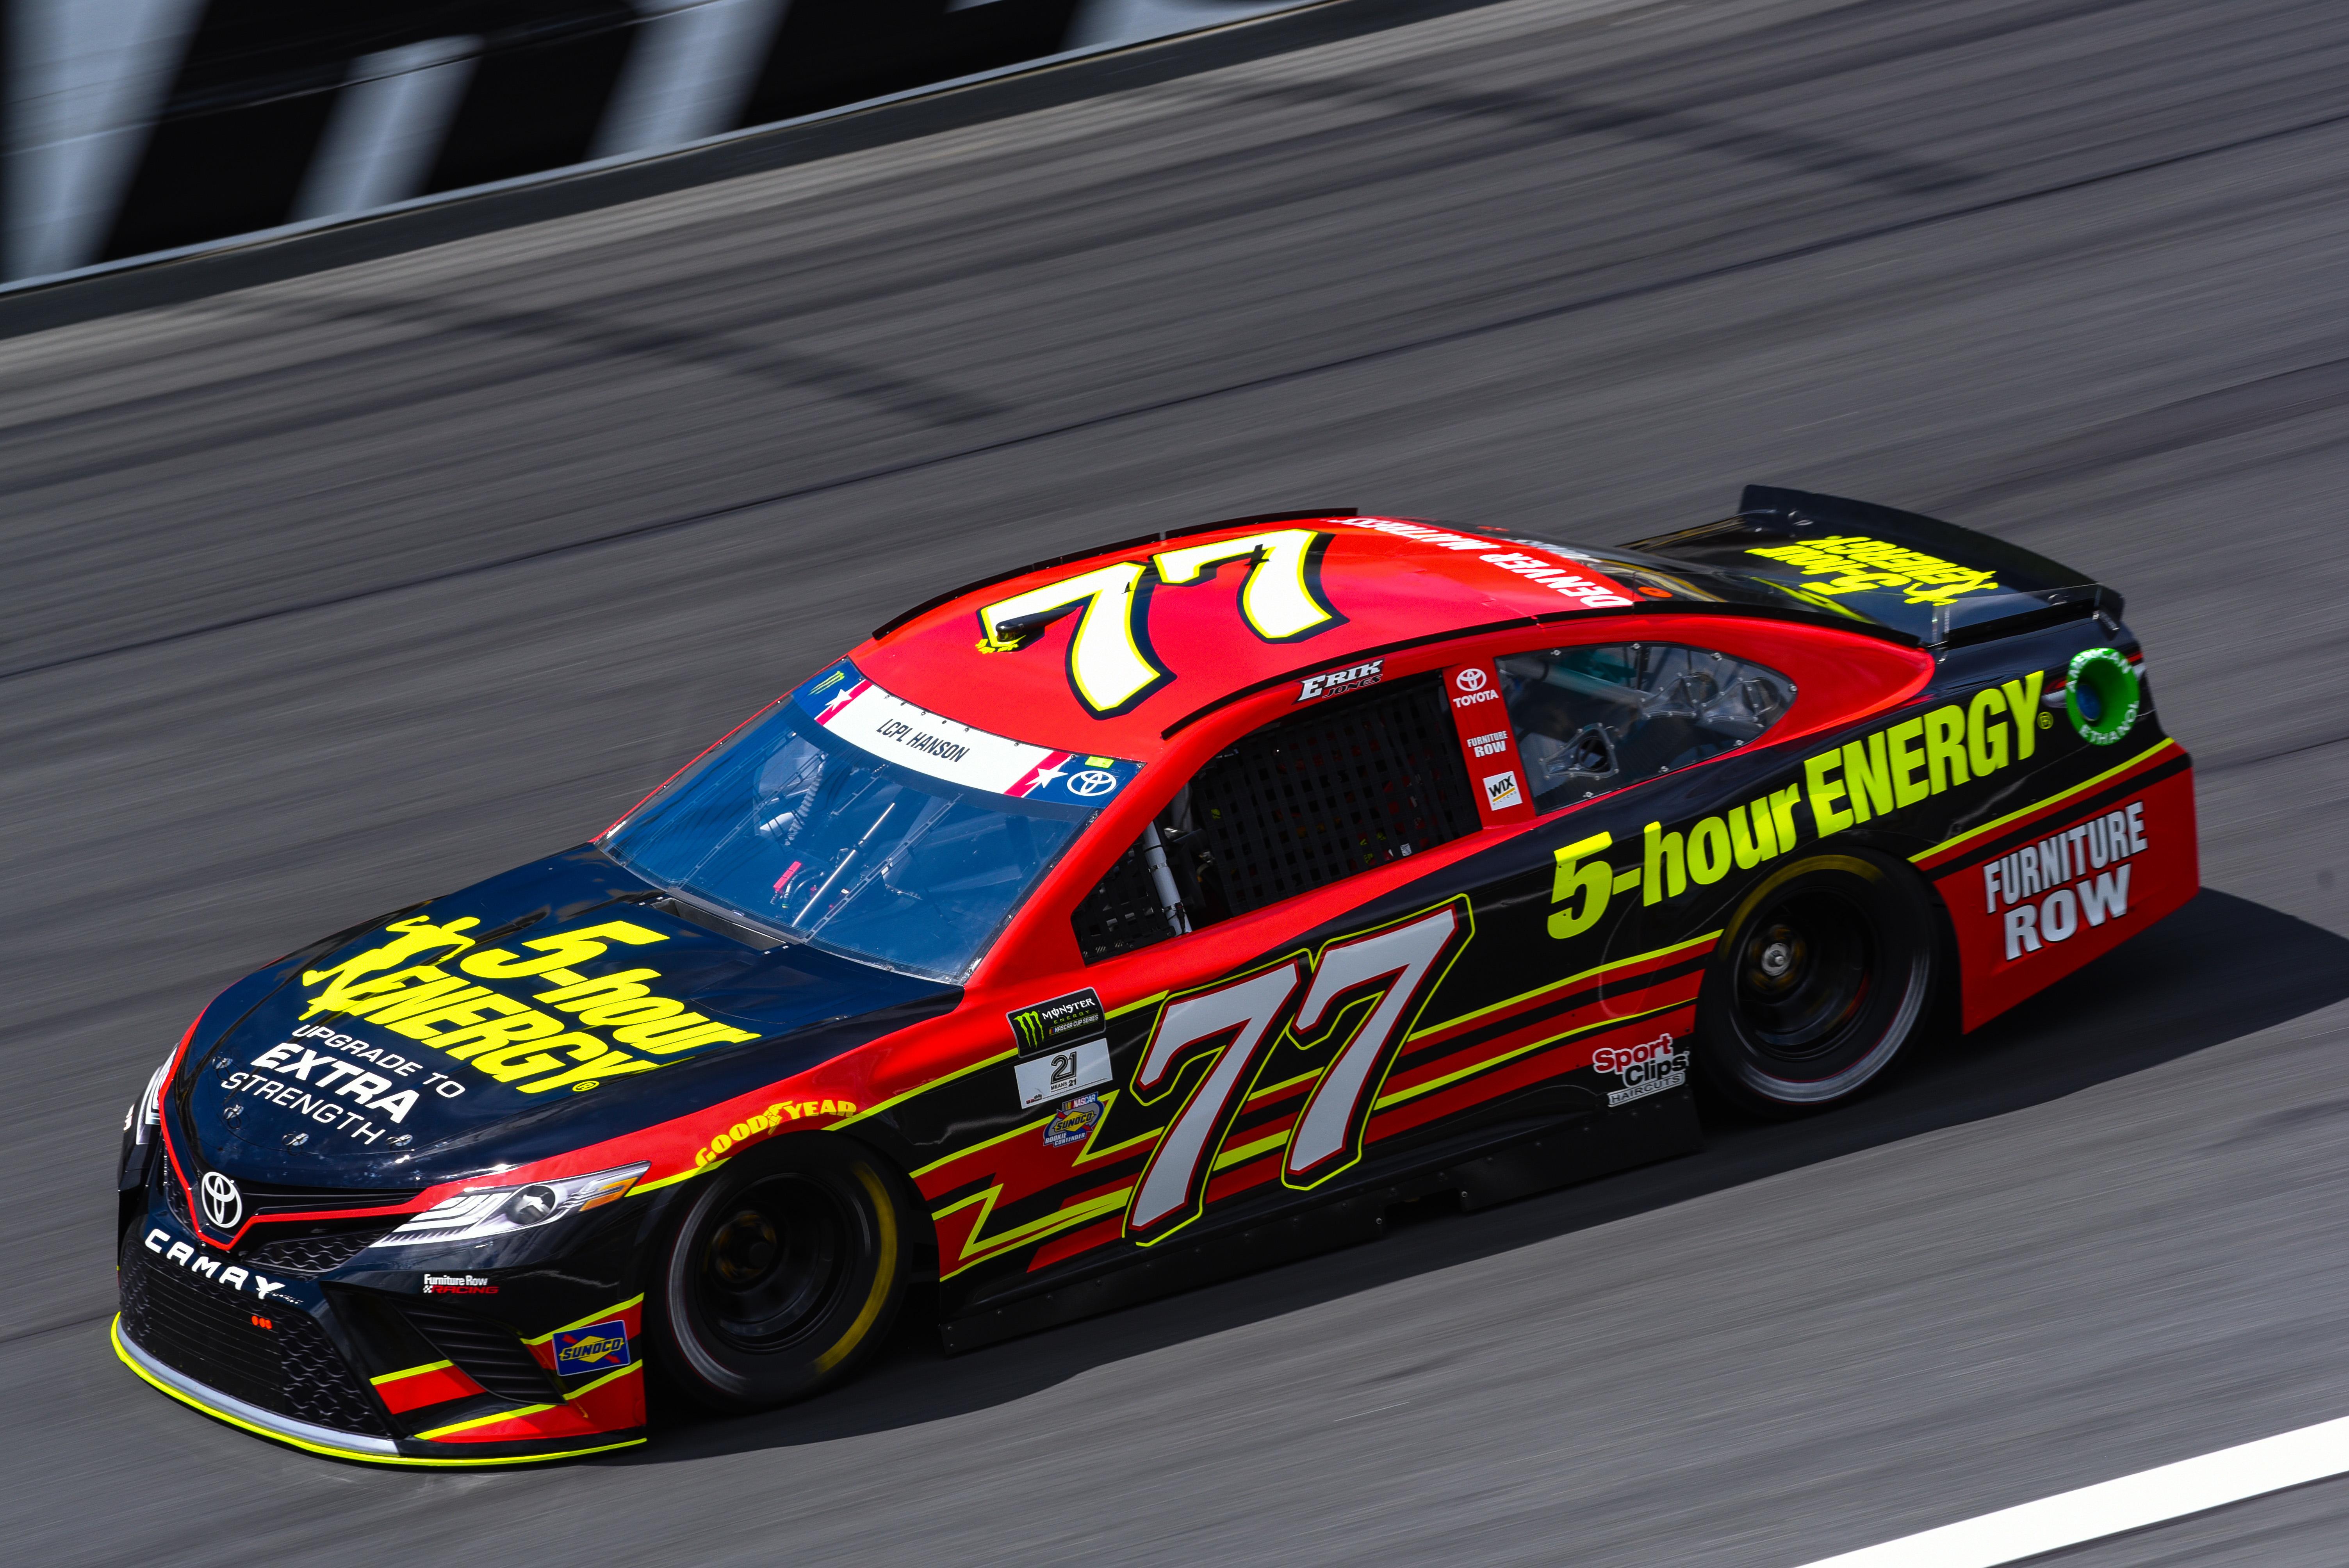 In any case, Jones' future looks bright as his paint scheme. (Photo Credit: Jeremy Thompson)